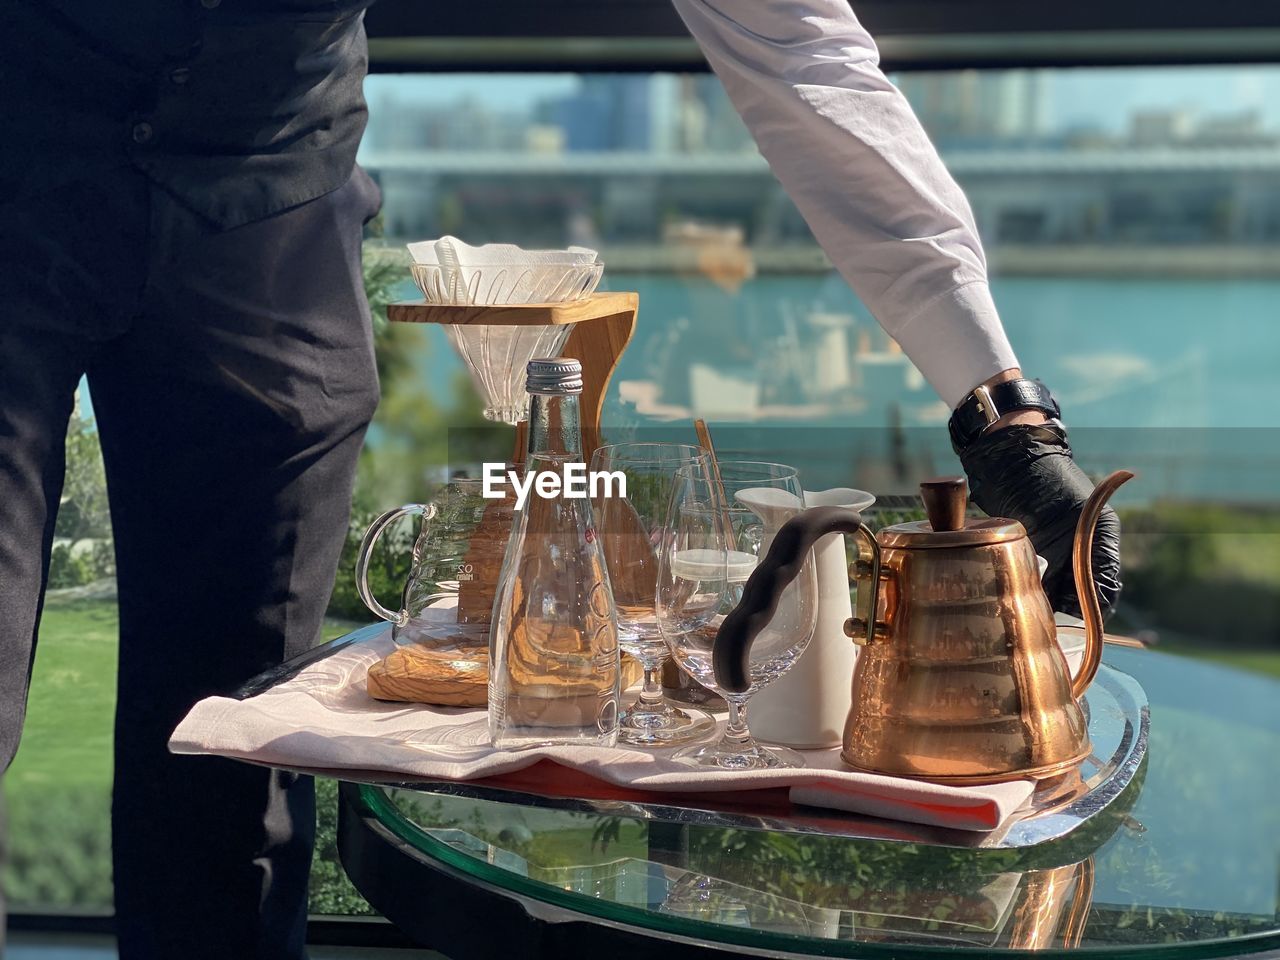 V60 served in one of the most beautiful spots overlooking bahrain bay.